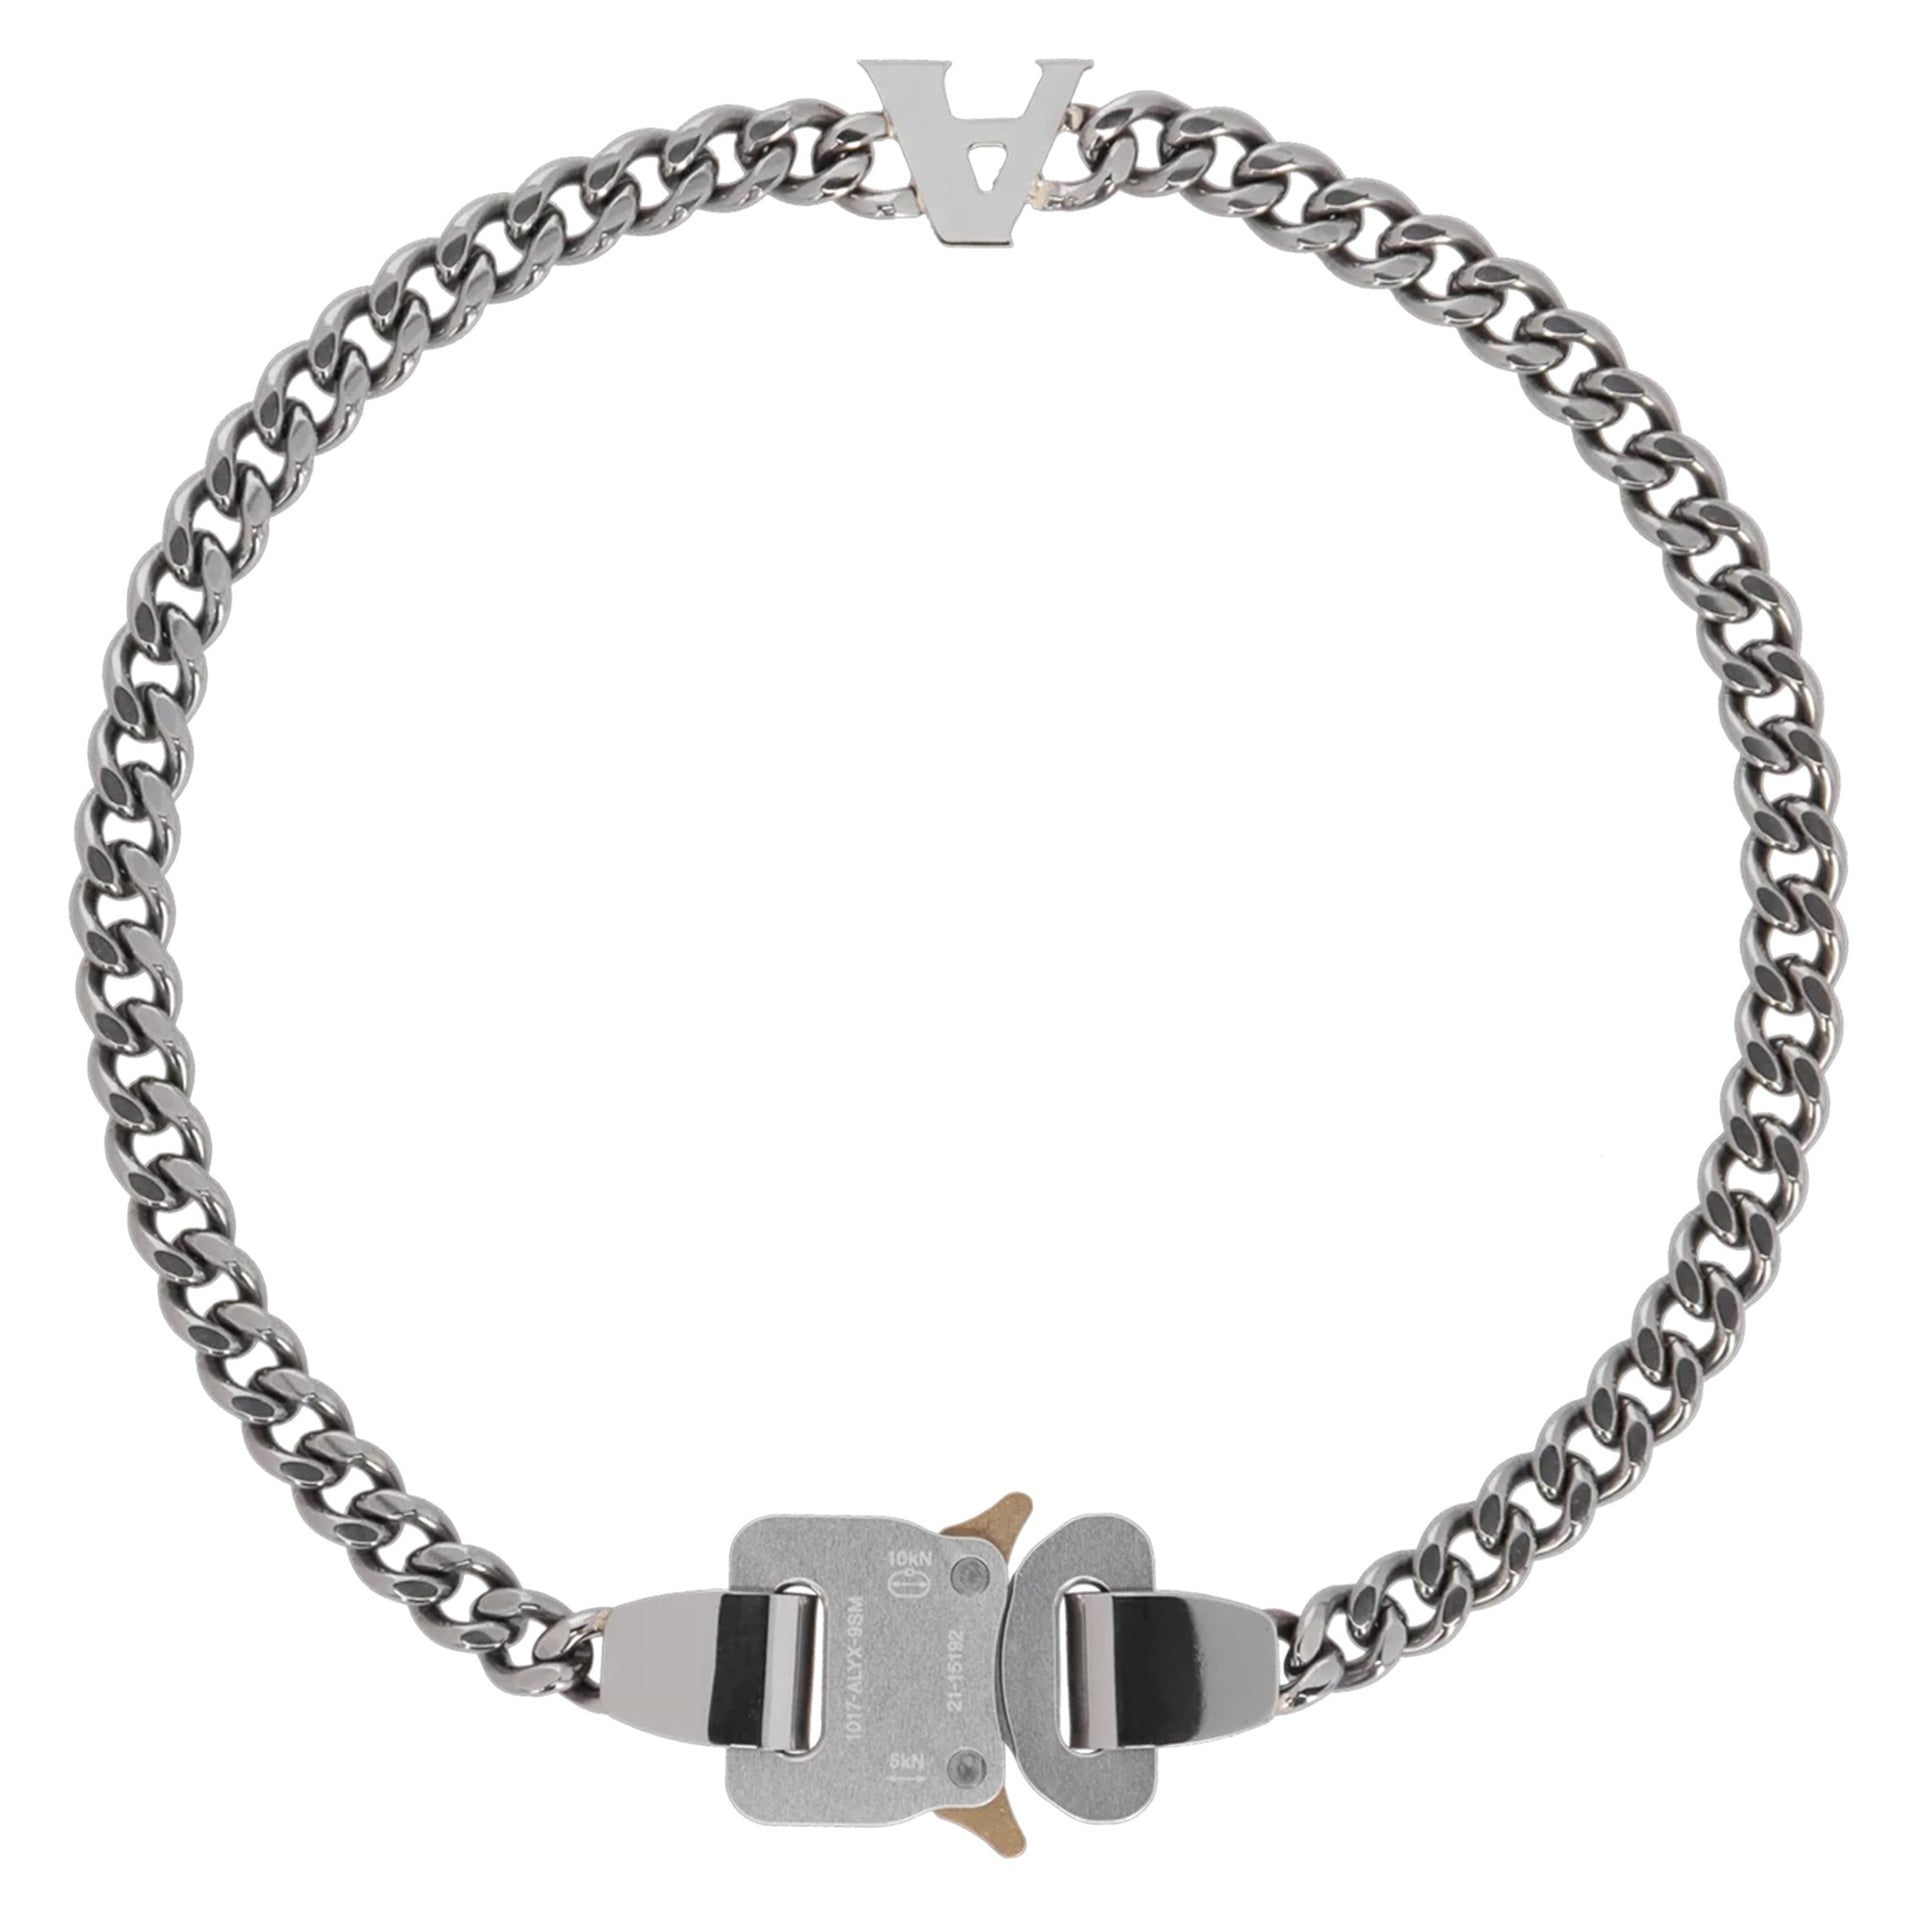 BUCKLE NECKLACE WITH CHARM / GRY0002:SILVER